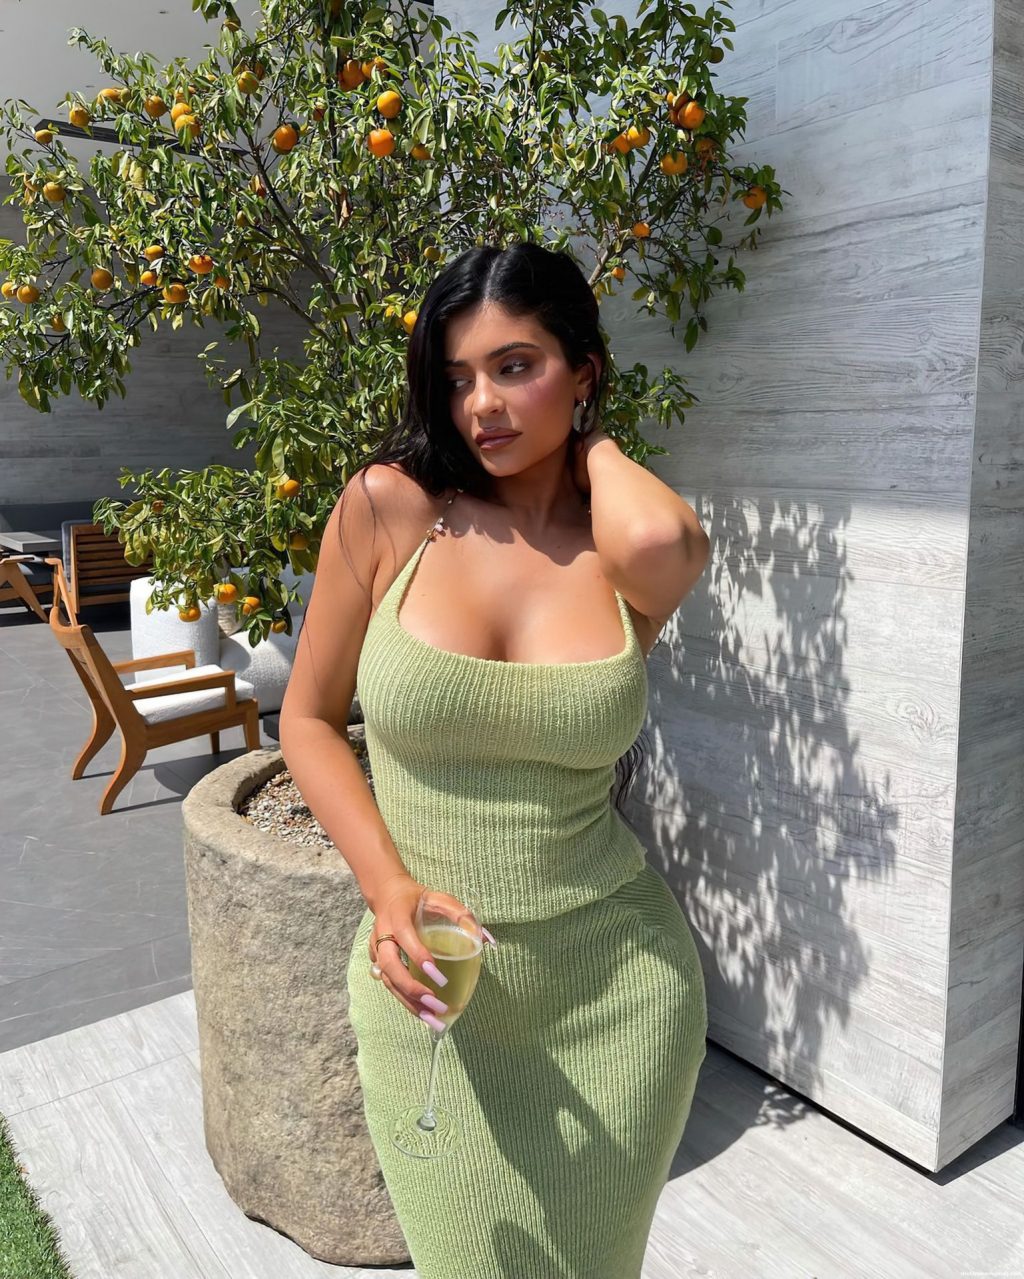 Kylie Jenner Looks Hot at The Party (6 Hot Photos)